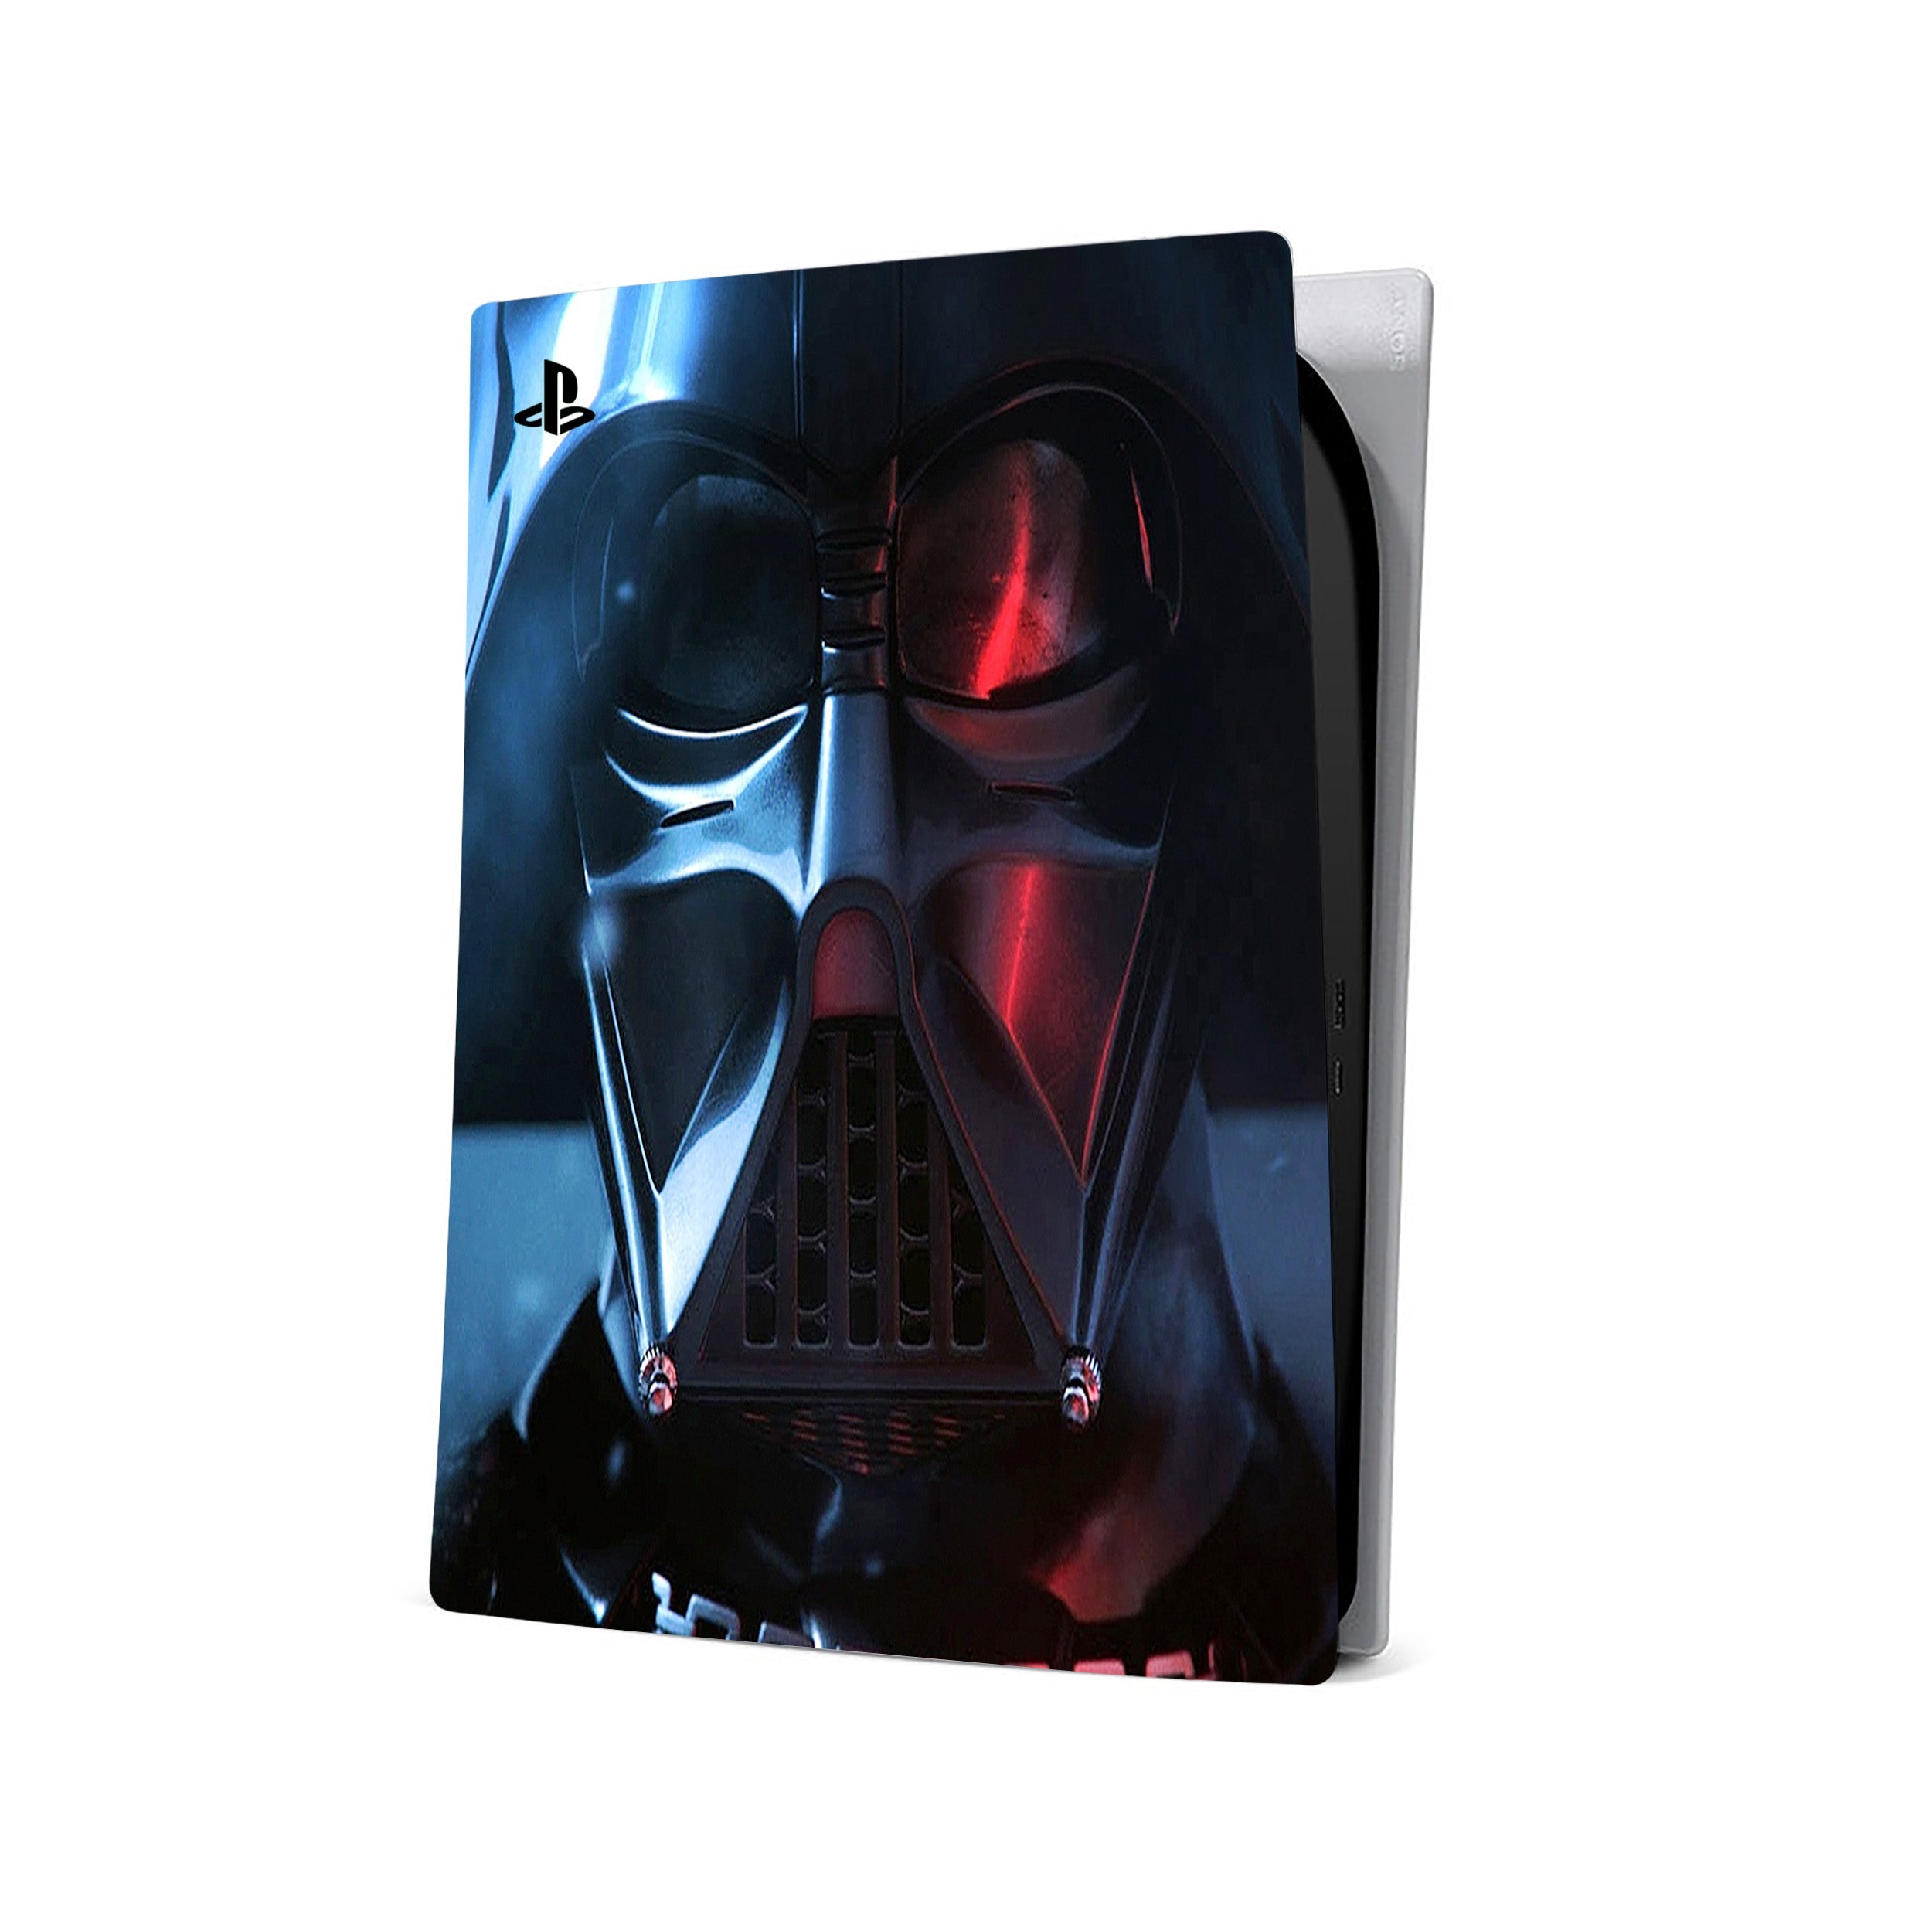 A video game skin featuring a Star Wars Darth Vader design for the PS5.